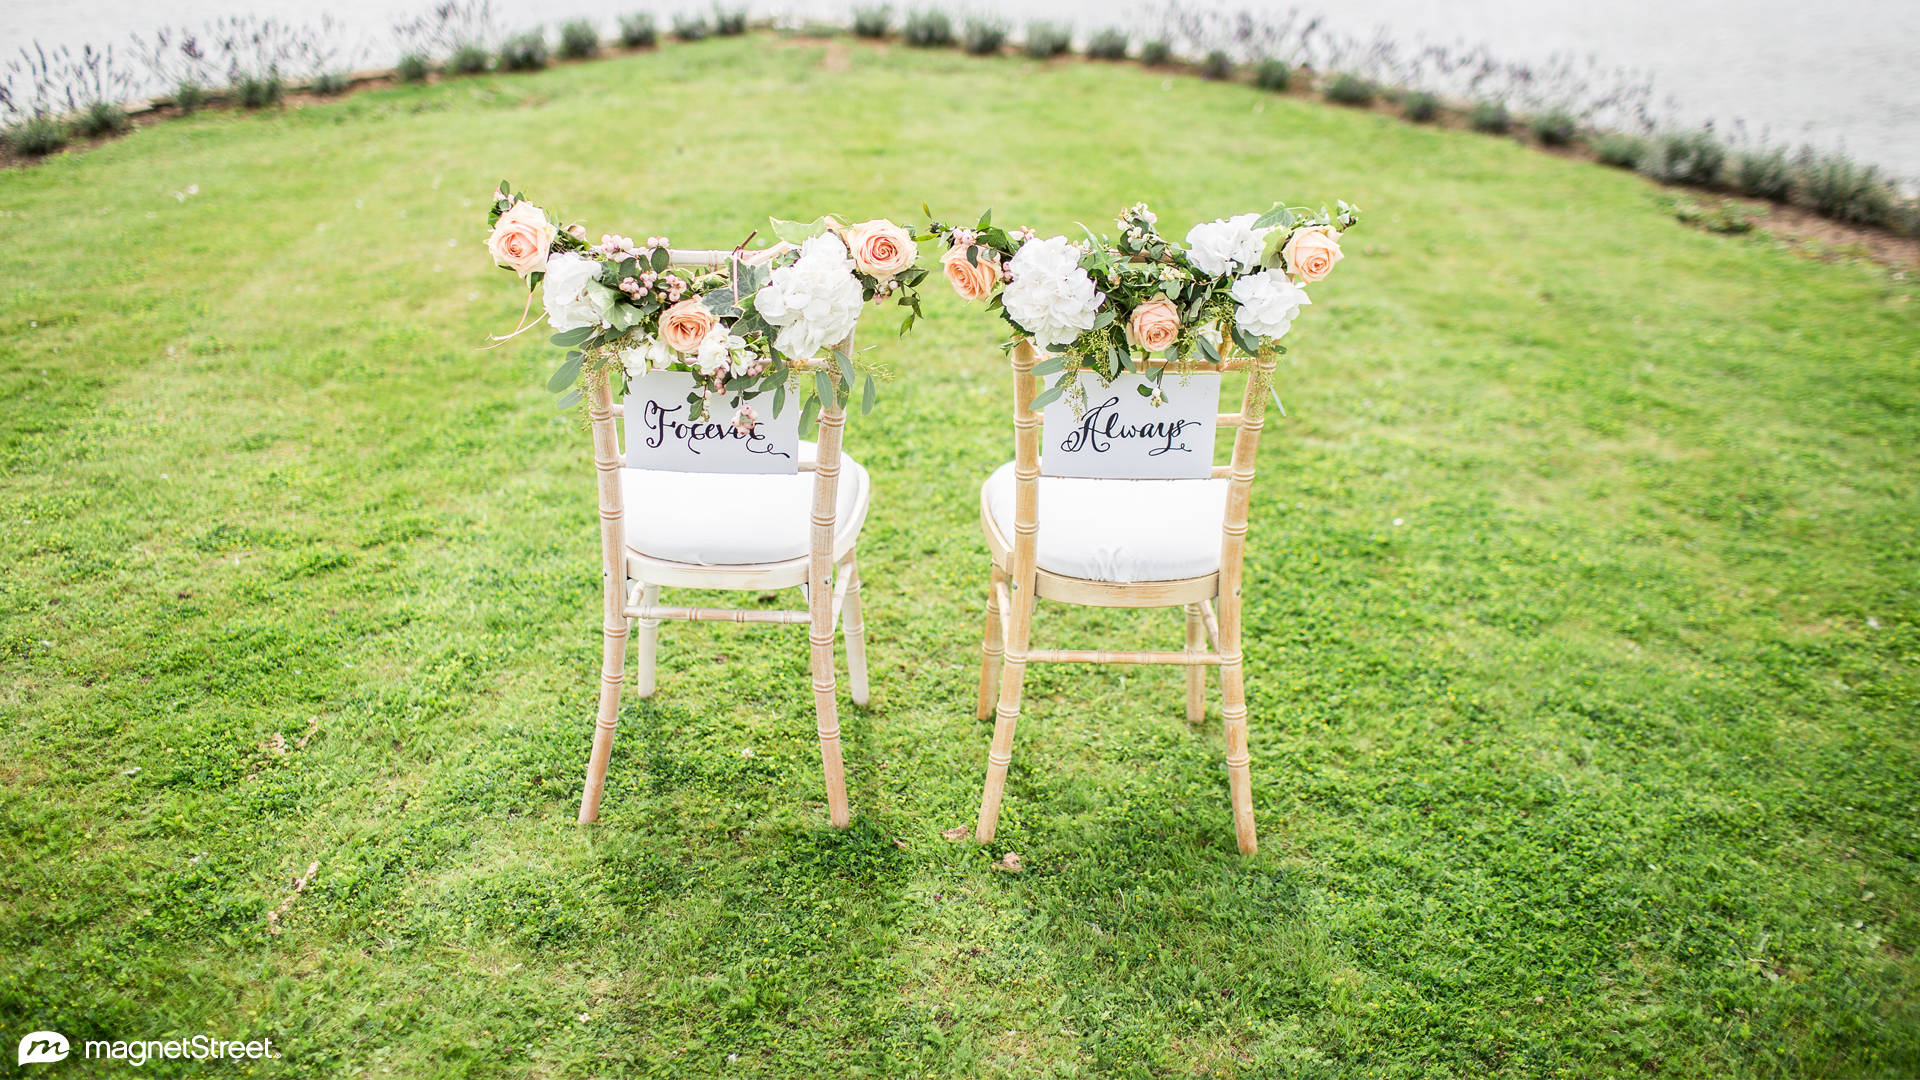 Forever-always Wedding Chairs Background